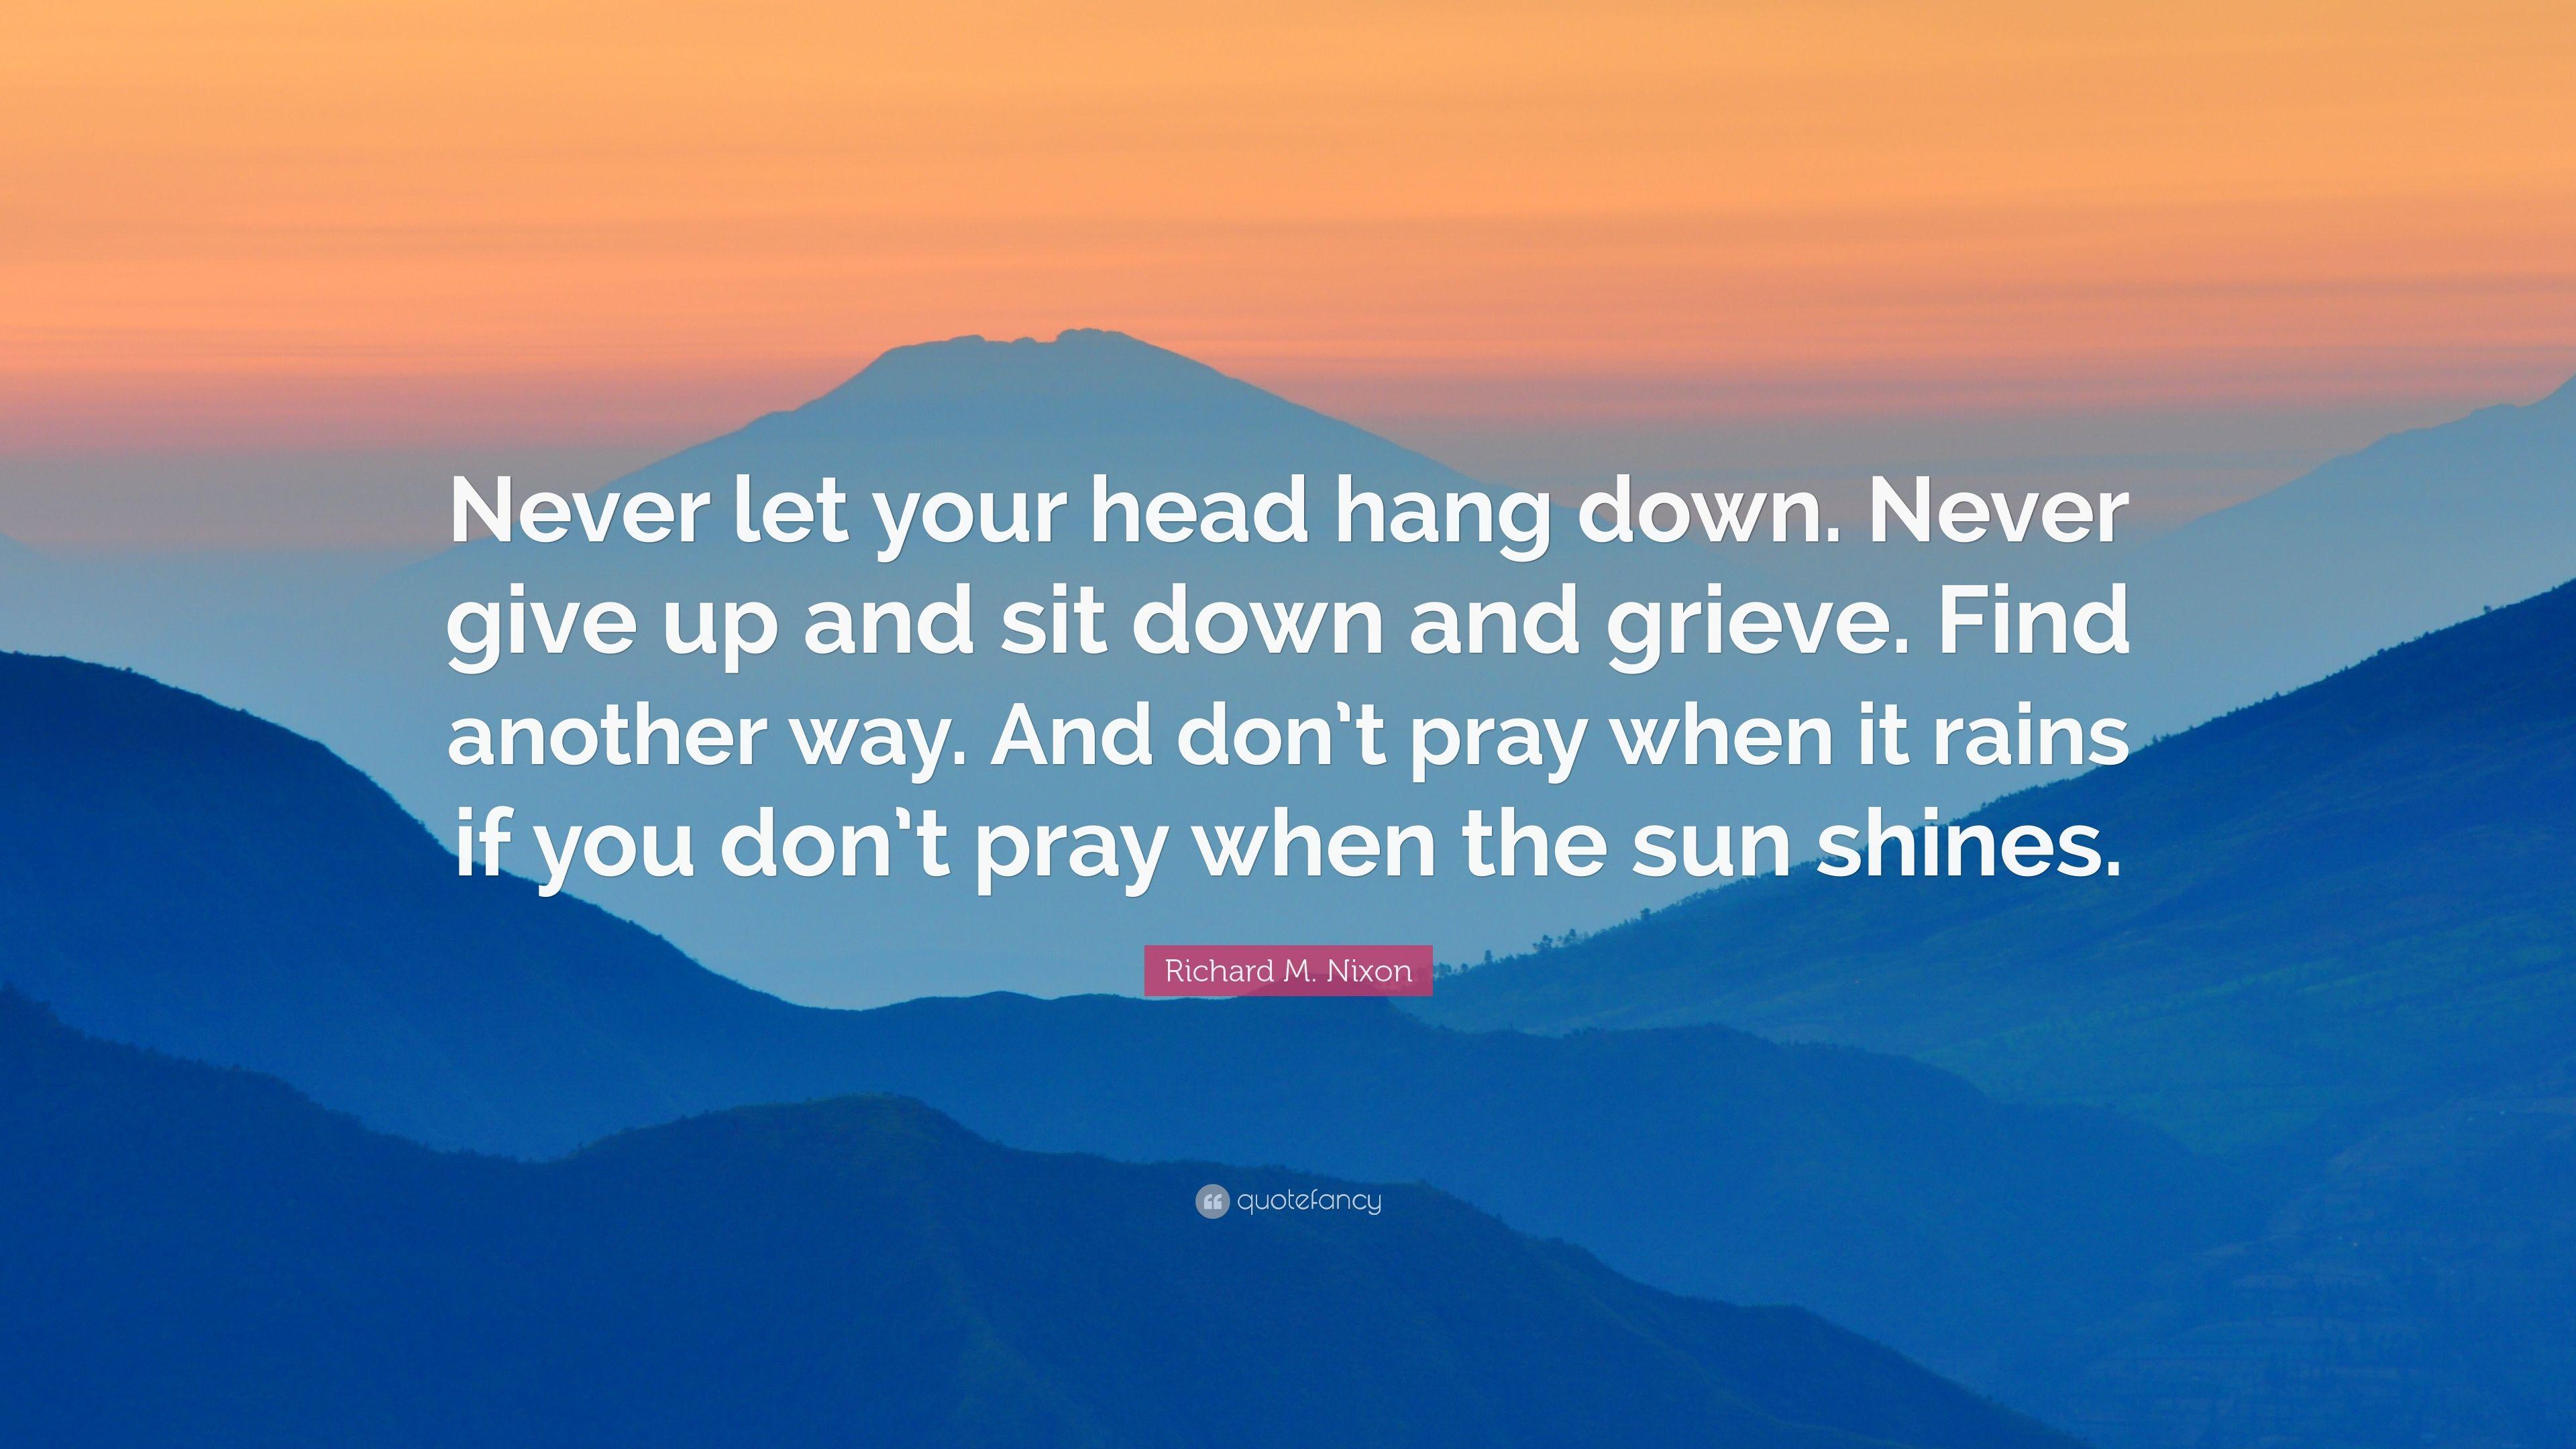 Richard M. Nixon Quote: “Never let your head hang down. Never give